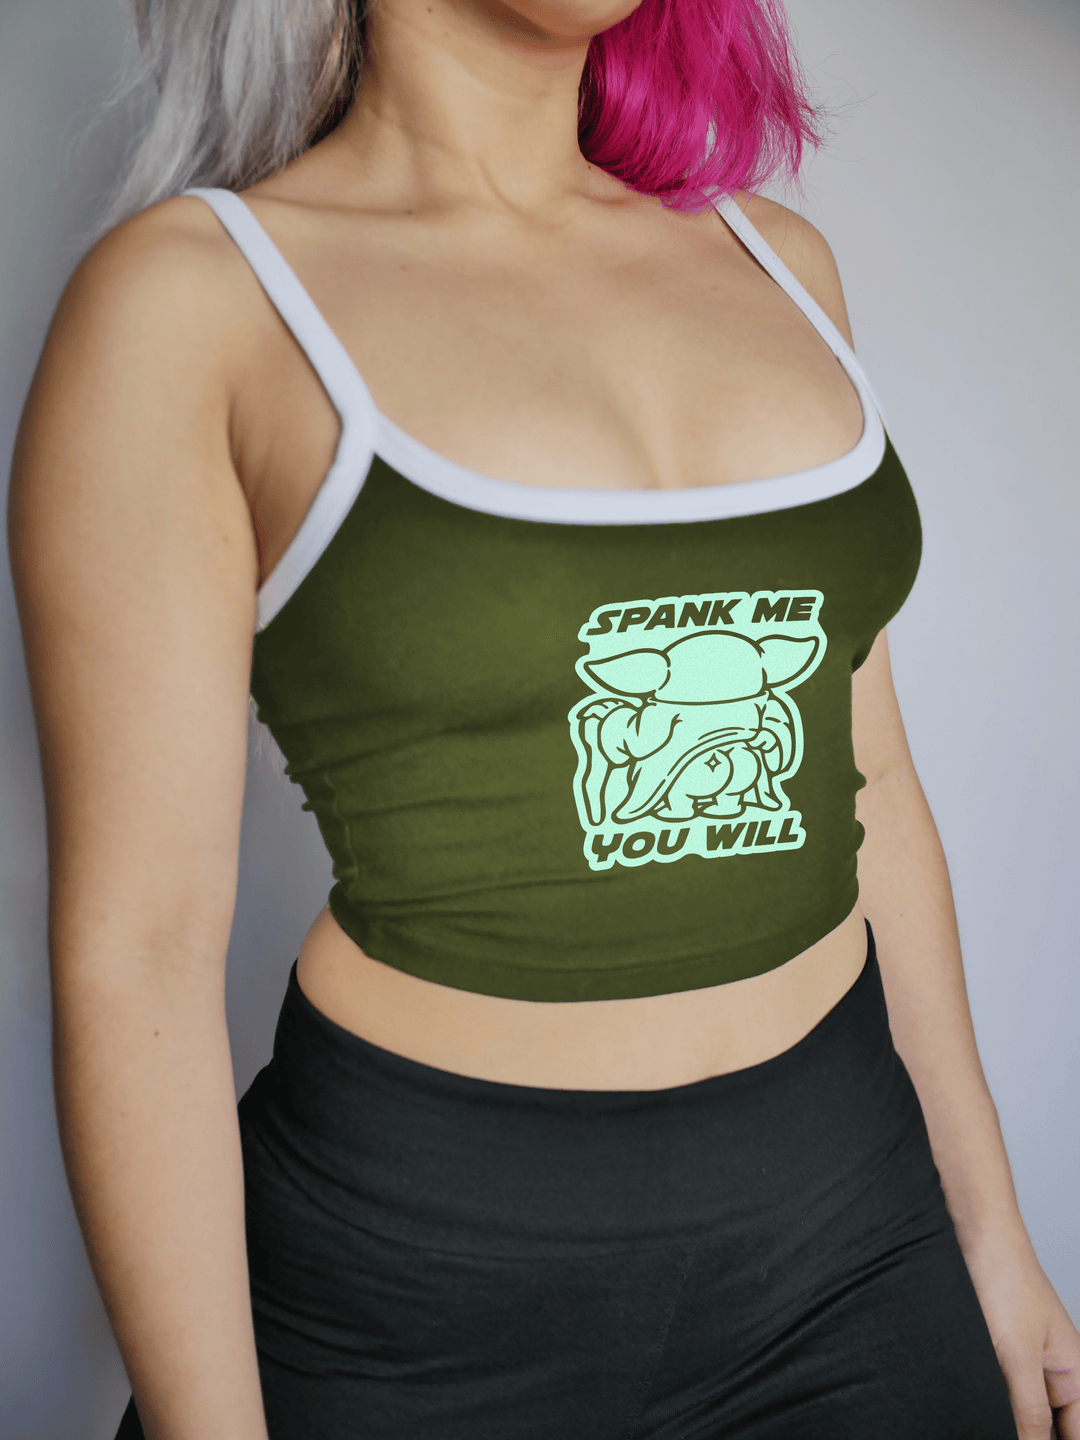 PixelThat Punderwear Tops Olive / S Spank Me You Will Crop Top